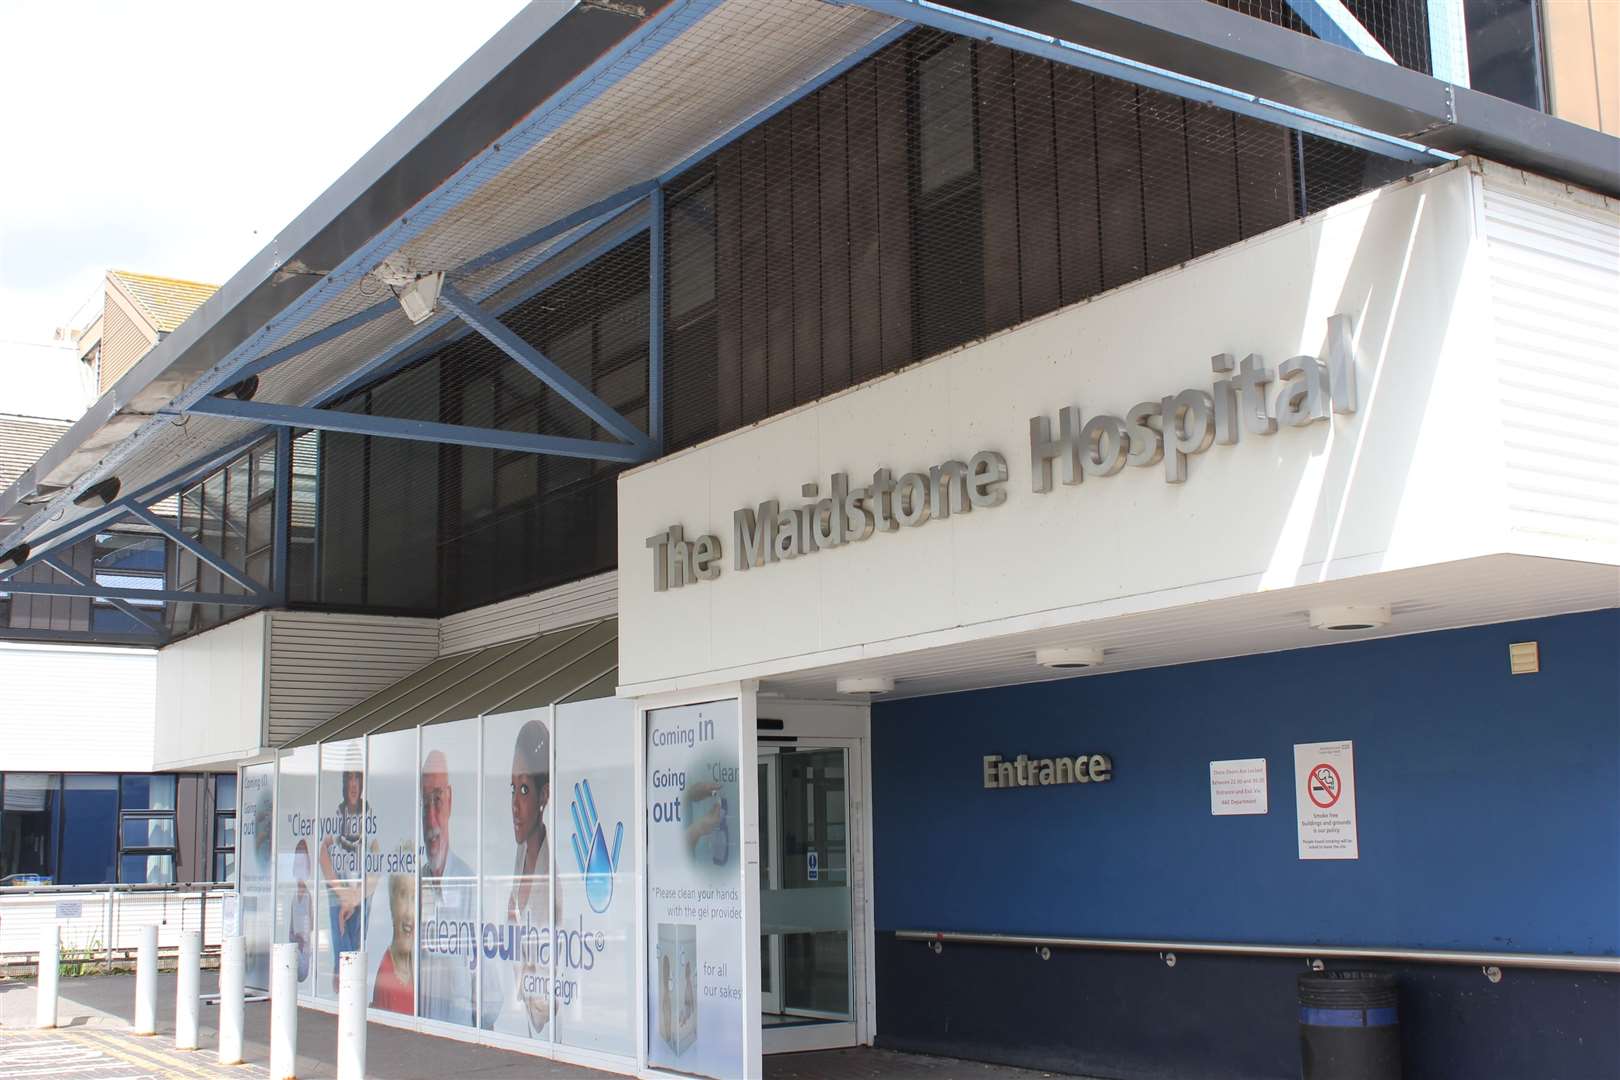 The incident happened at Maidstone Hospital